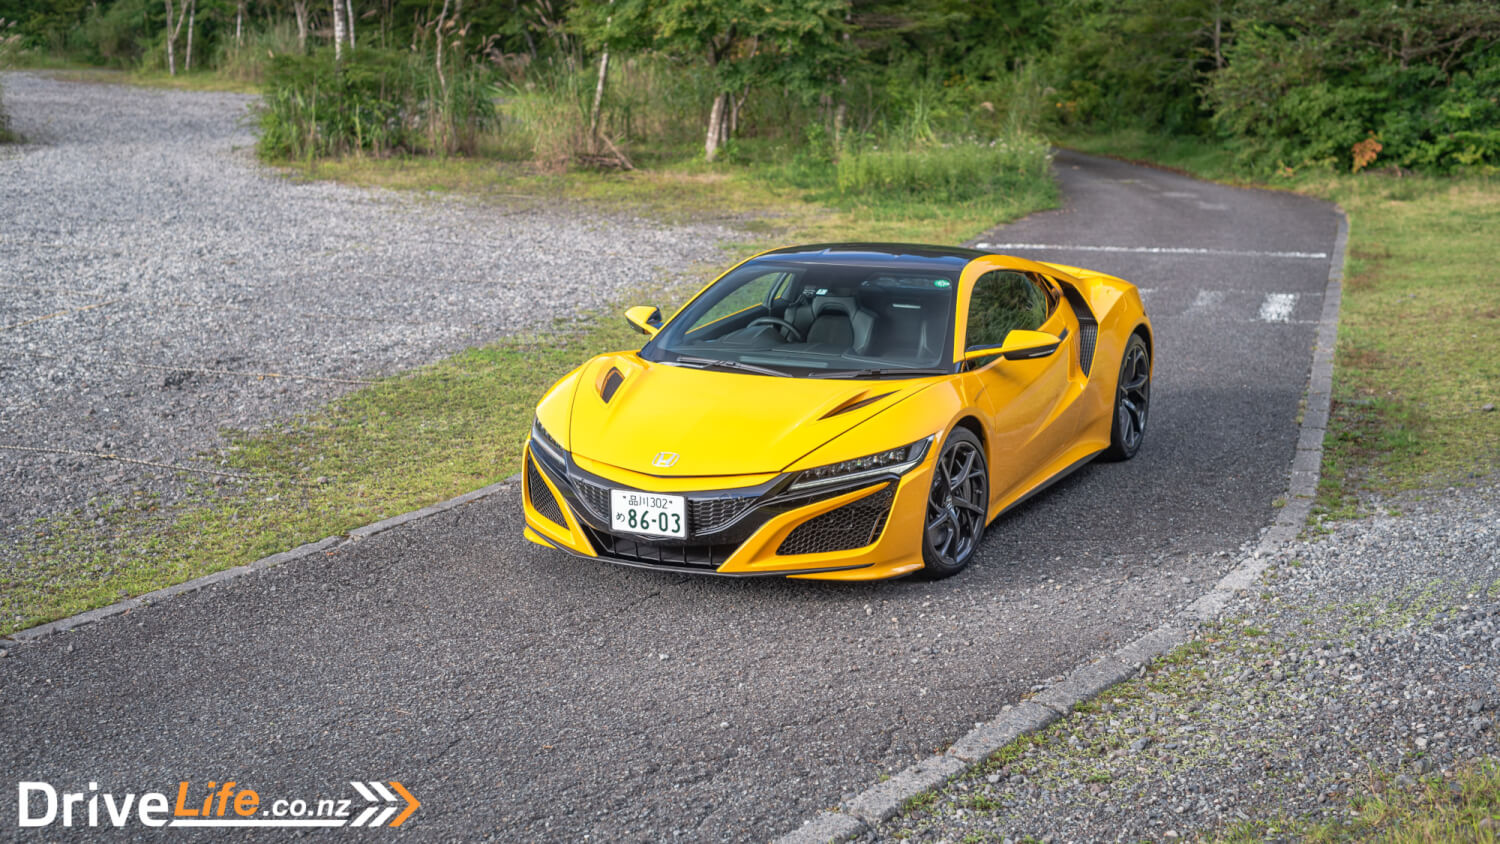 Five things about the 2020 Honda NSX - DriveLife